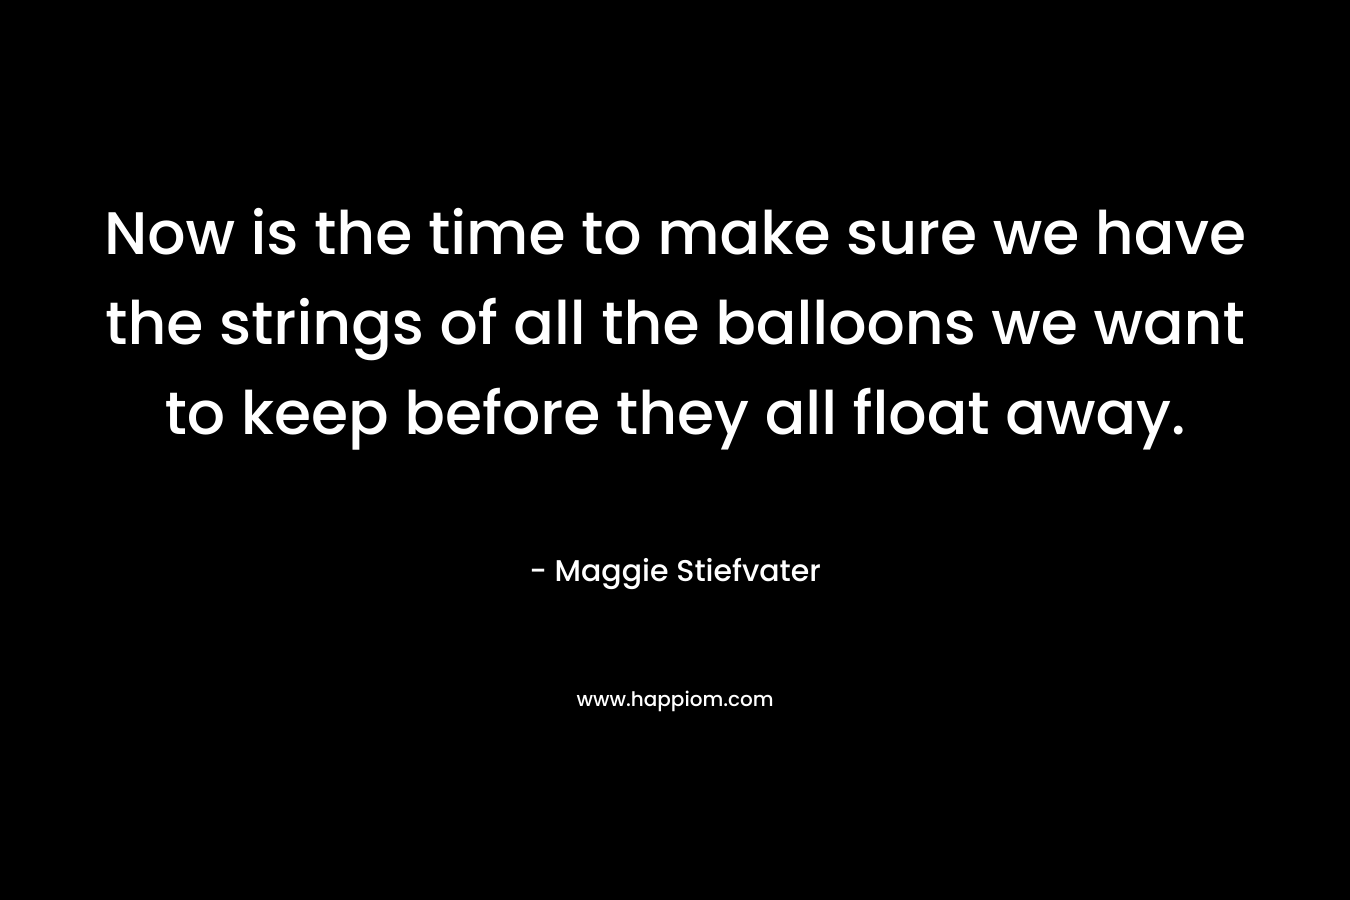 Now is the time to make sure we have the strings of all the balloons we want to keep before they all float away.